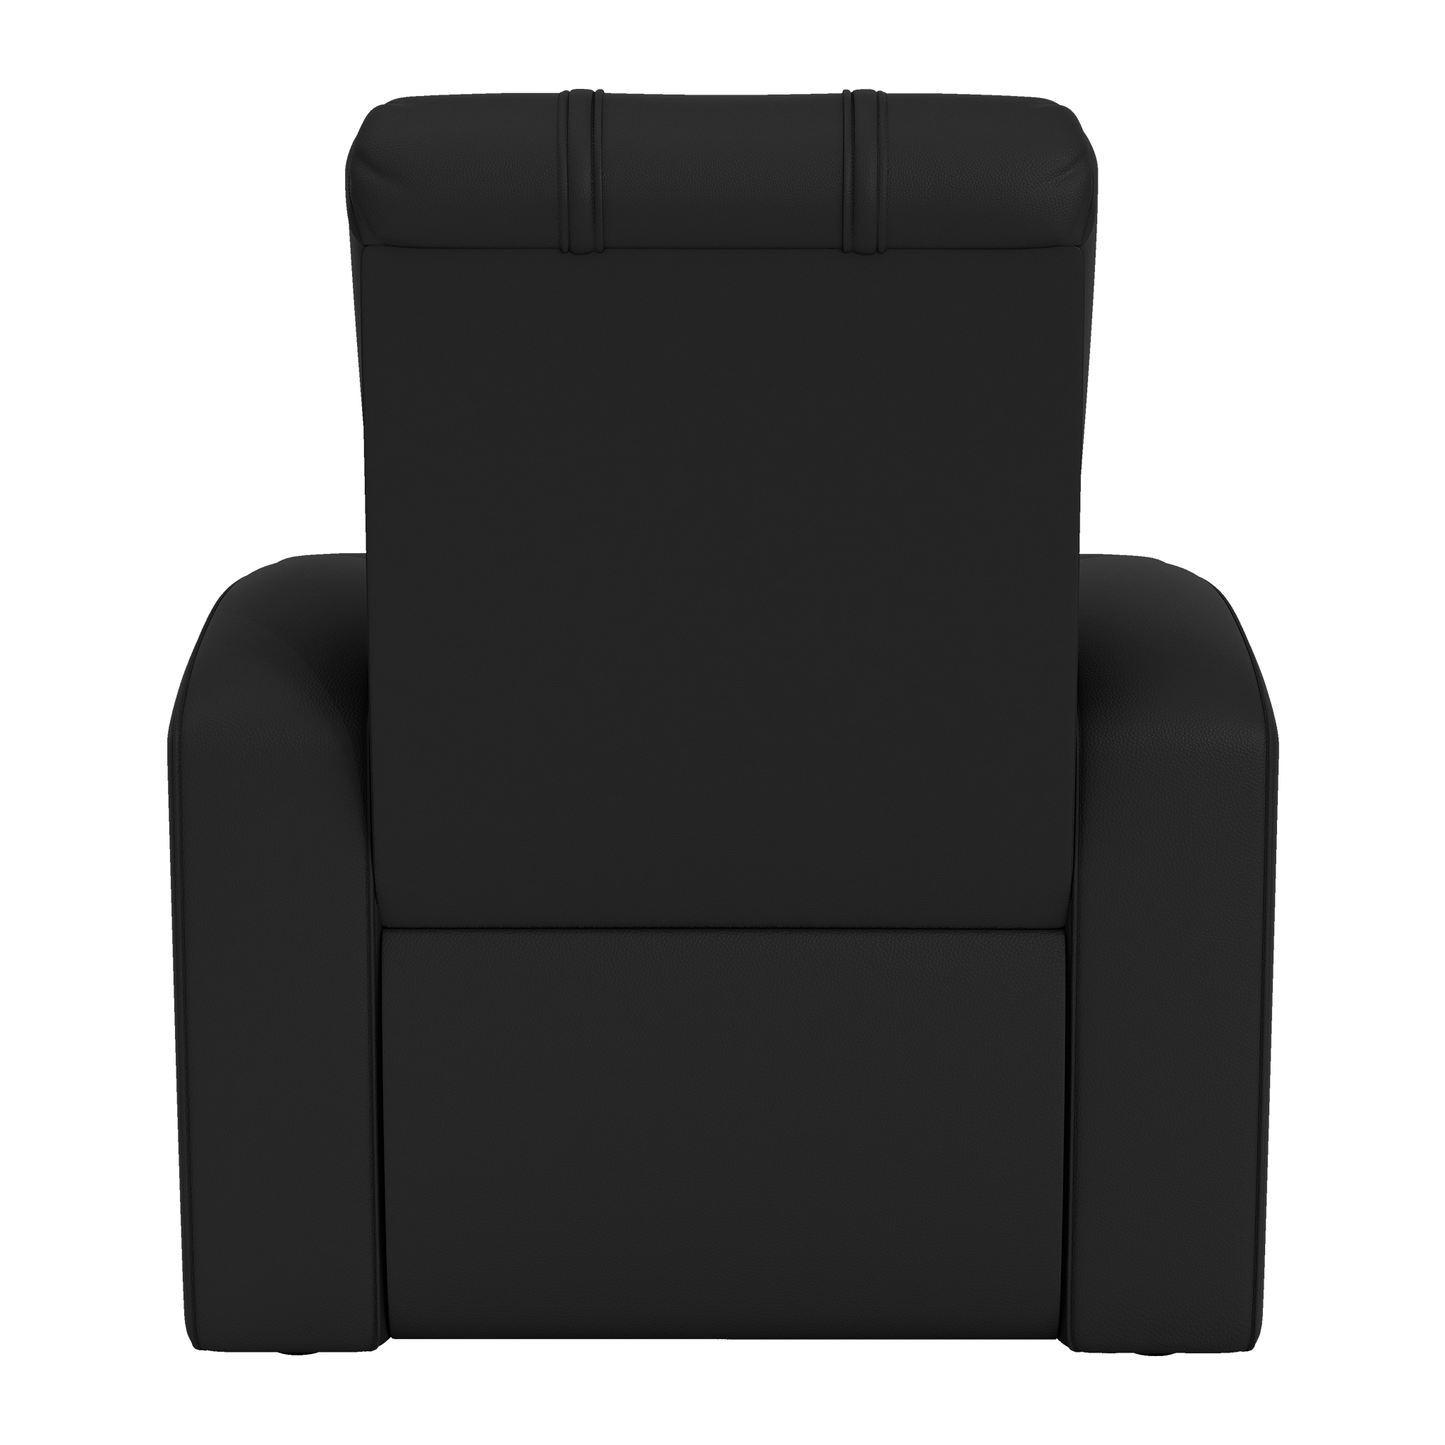 Relax Home Theater Recliner with Hanukkah Candles Logo